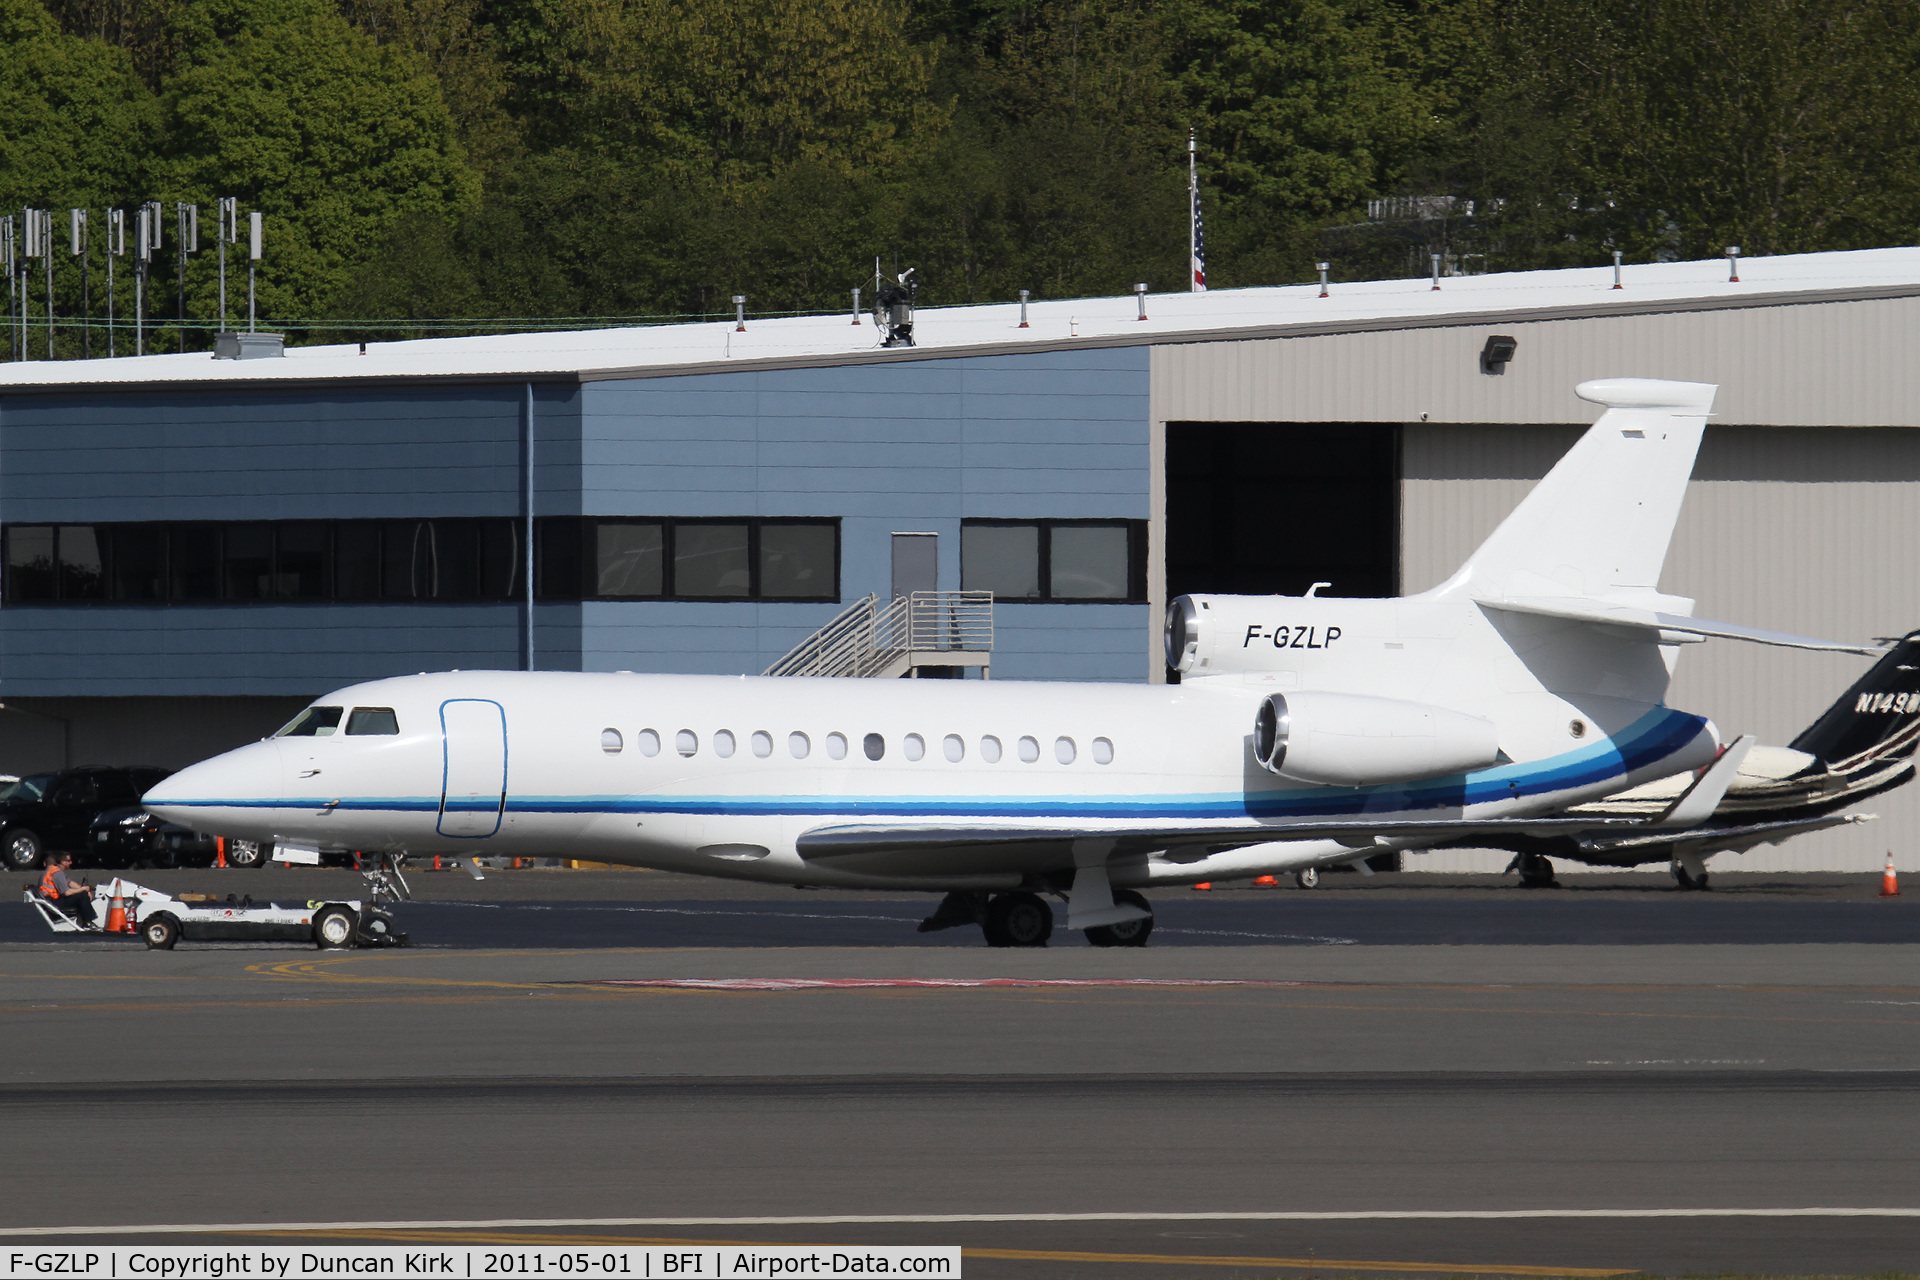 F-GZLP, 2007 Dassault Falcon 7X C/N 005, A nice BFI visitor